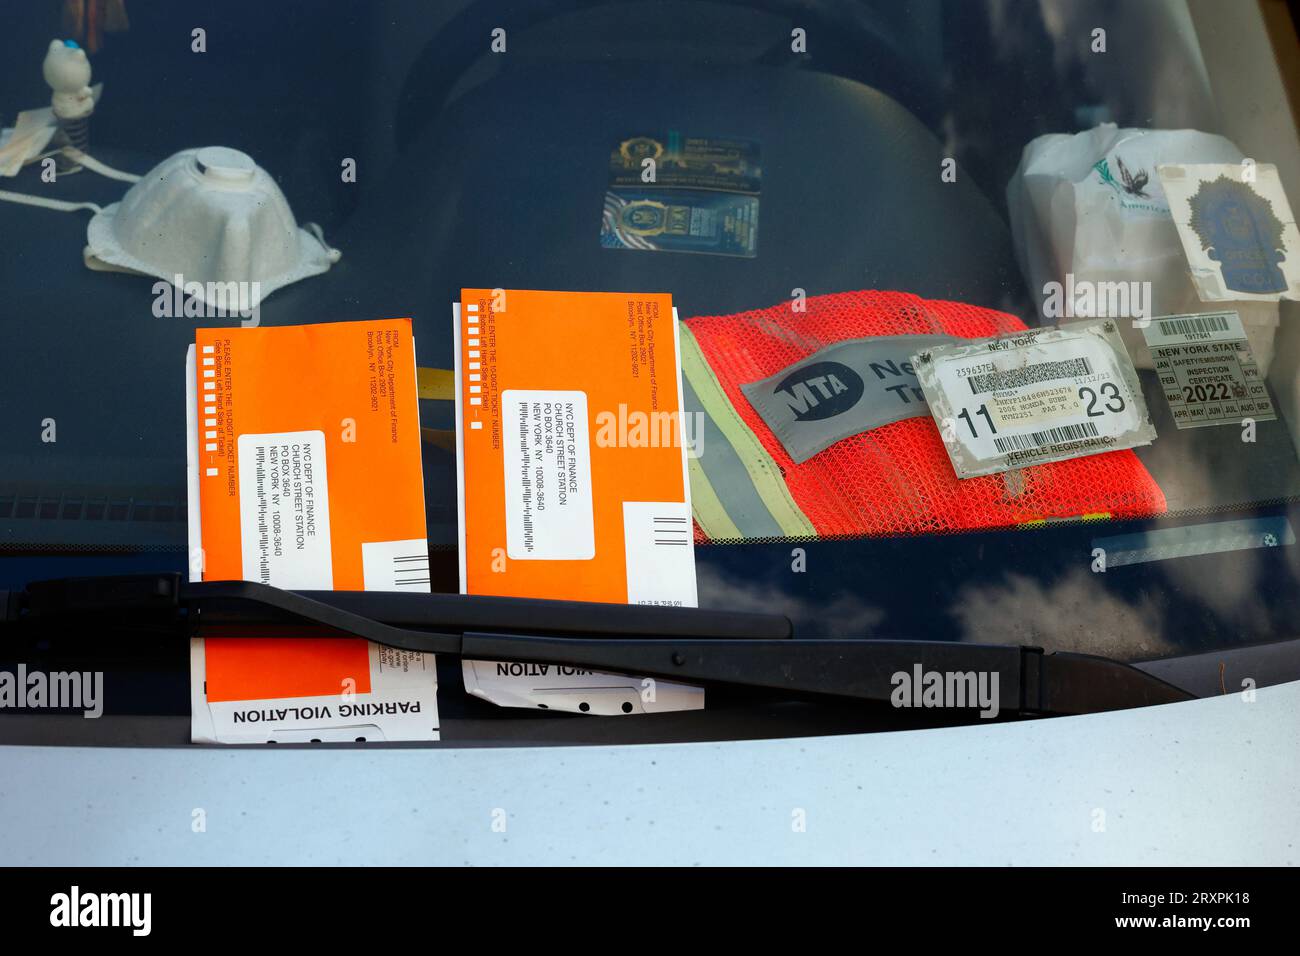 Vehicle in New York City with police courtesy cards, work identification, and placards used to deter traffic agents from issuing parking tickets. Stock Photo